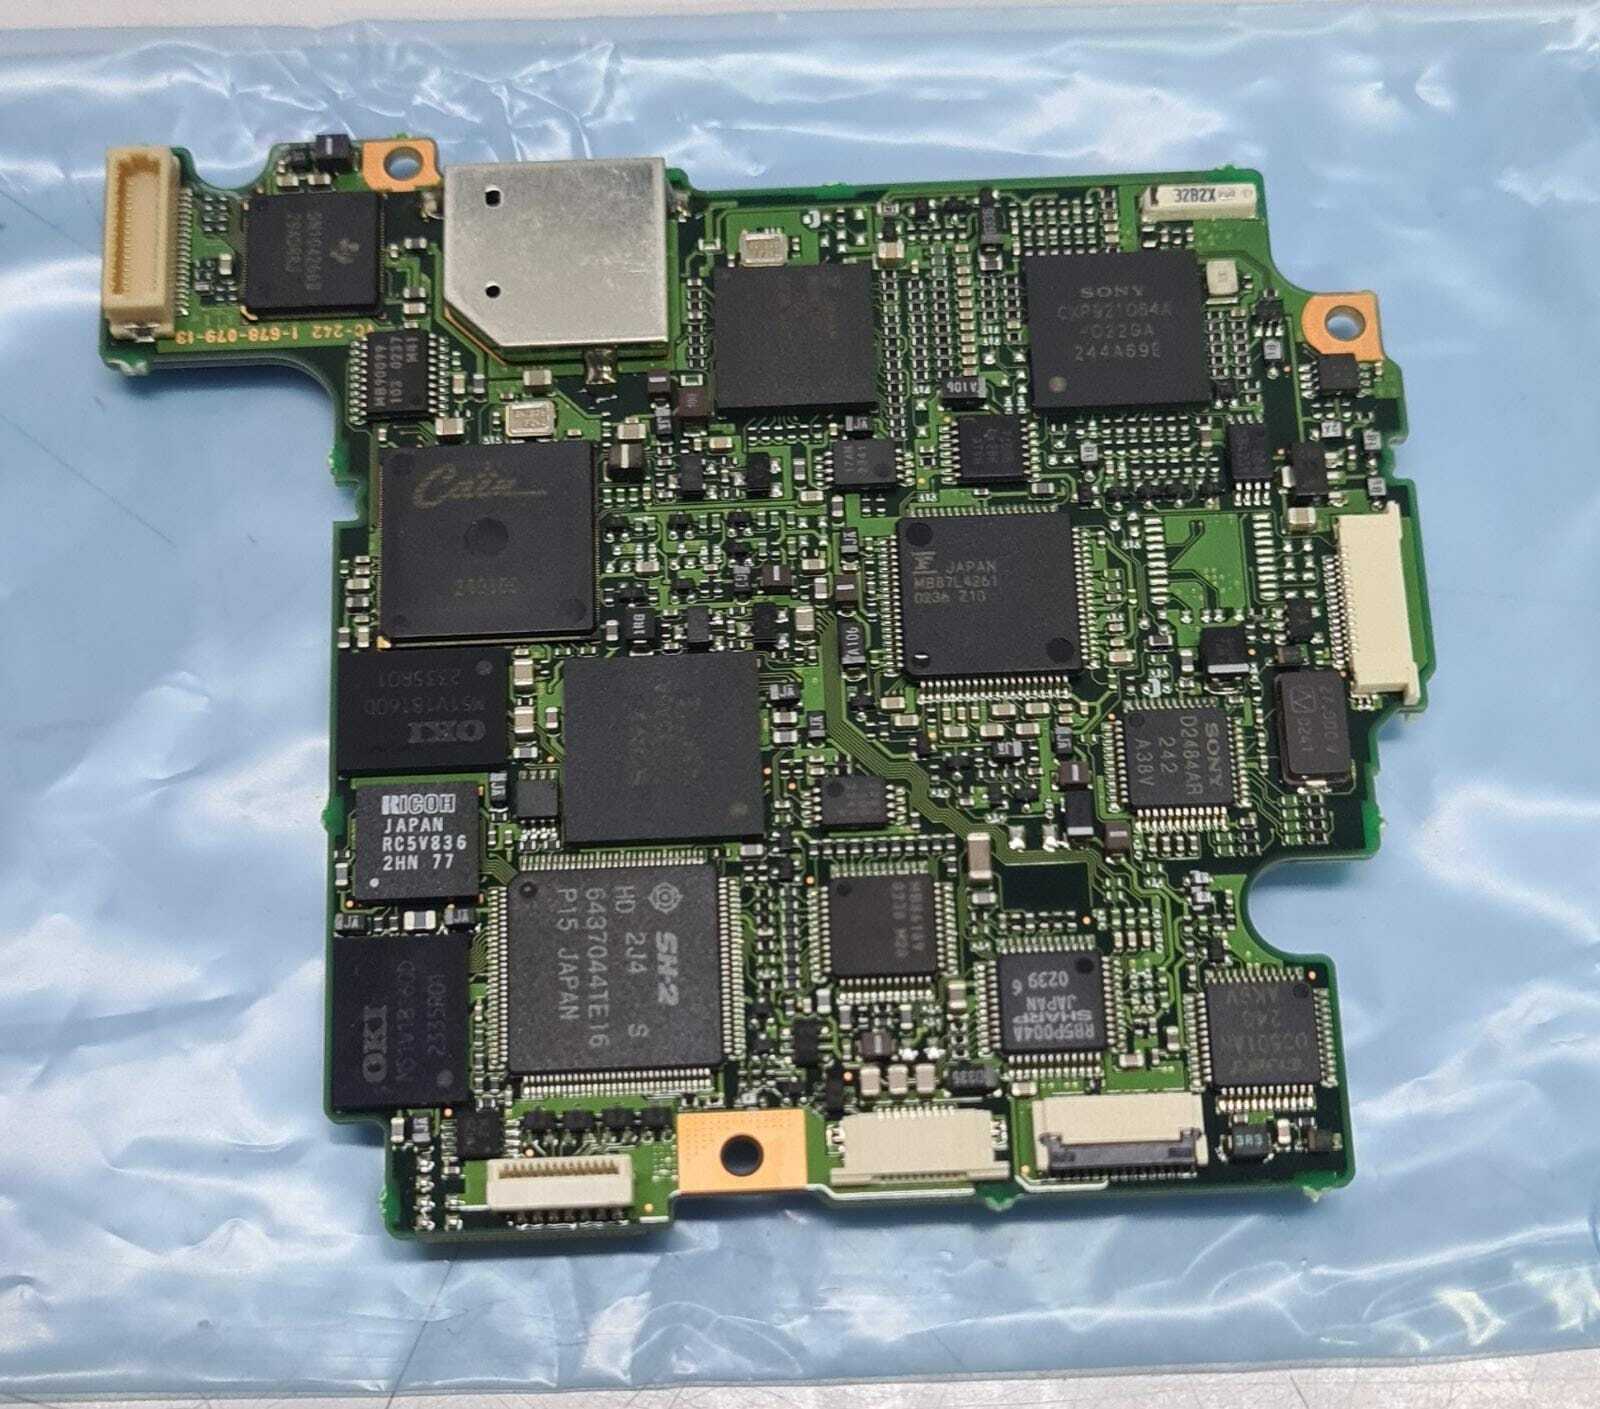 Sony Dsr-pd150 A-7096-243-a Vc-242d Complete Mounted C. Board 1-678-079-13